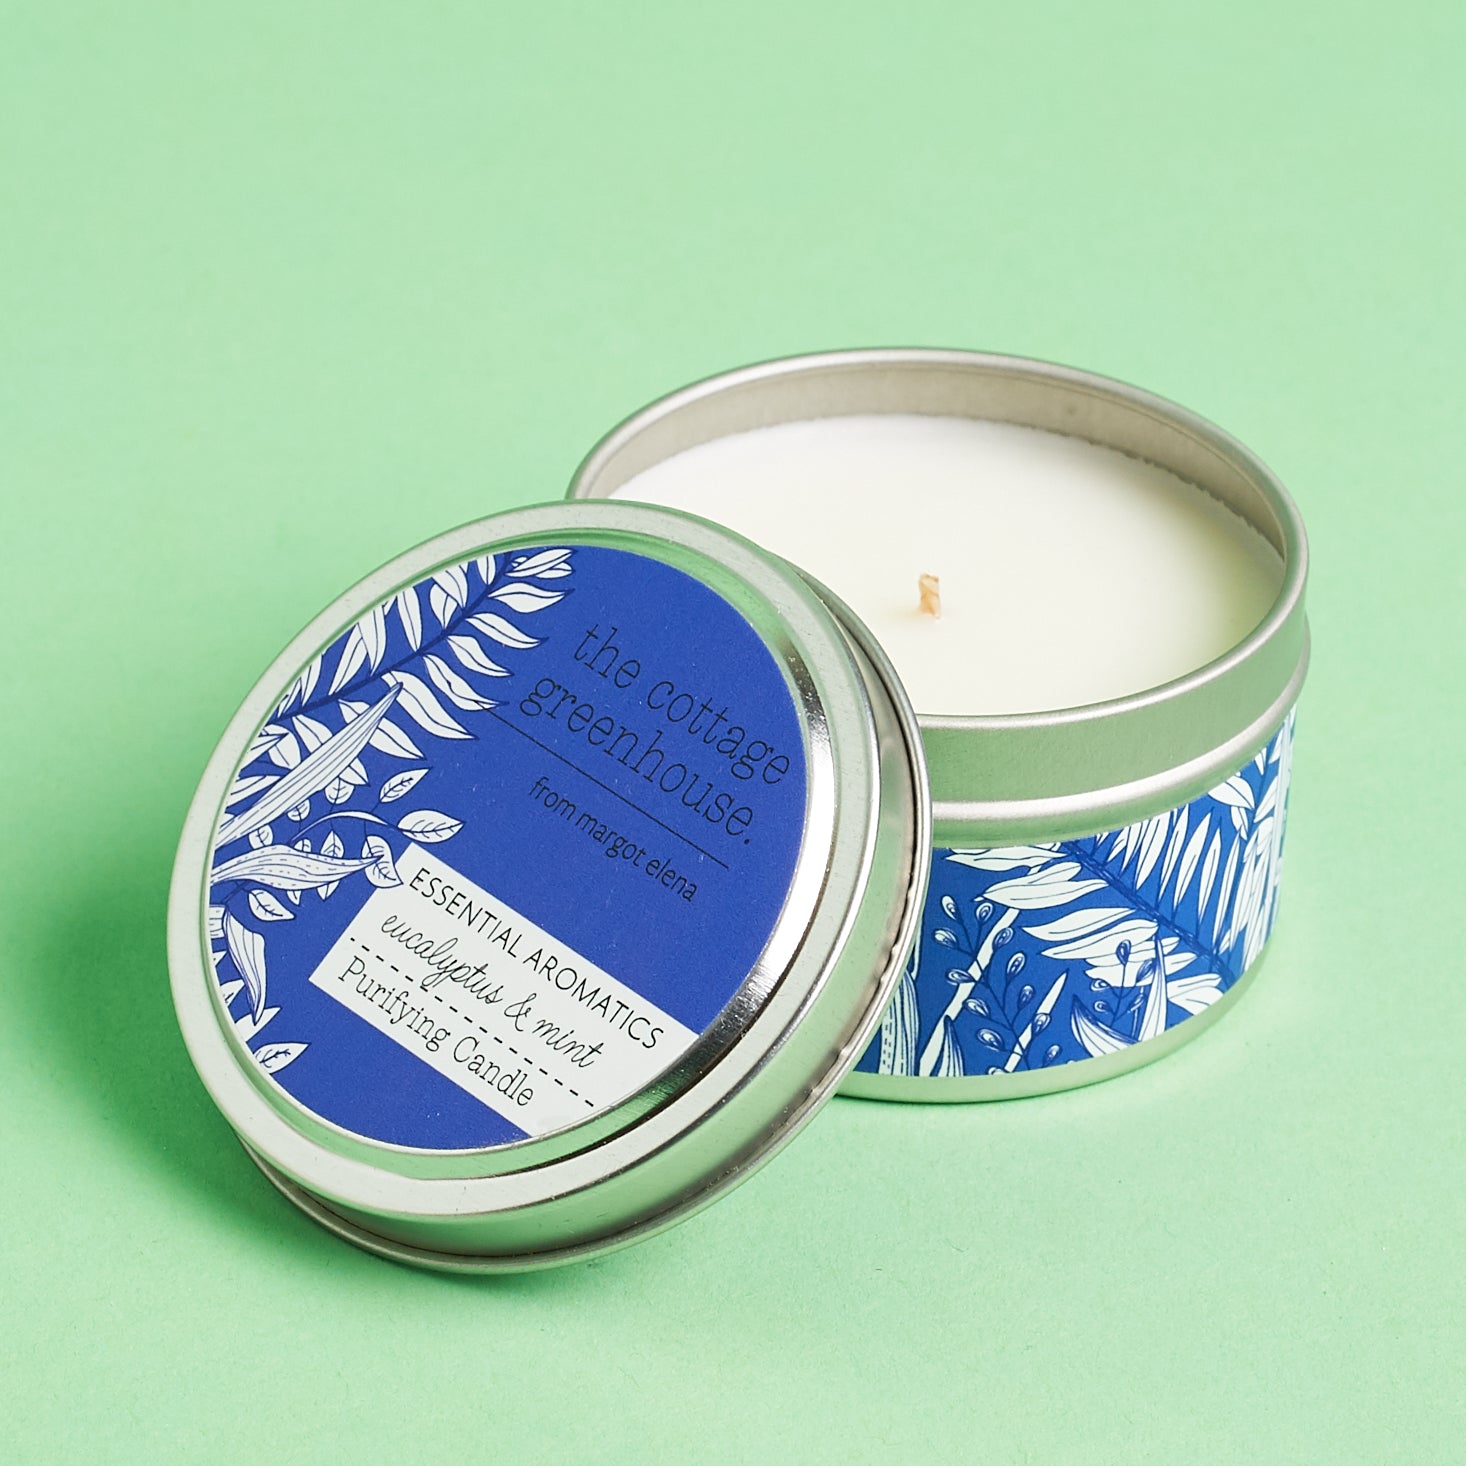 The Cottage Greenhouse Eucalyptus & Mint Travel Candle